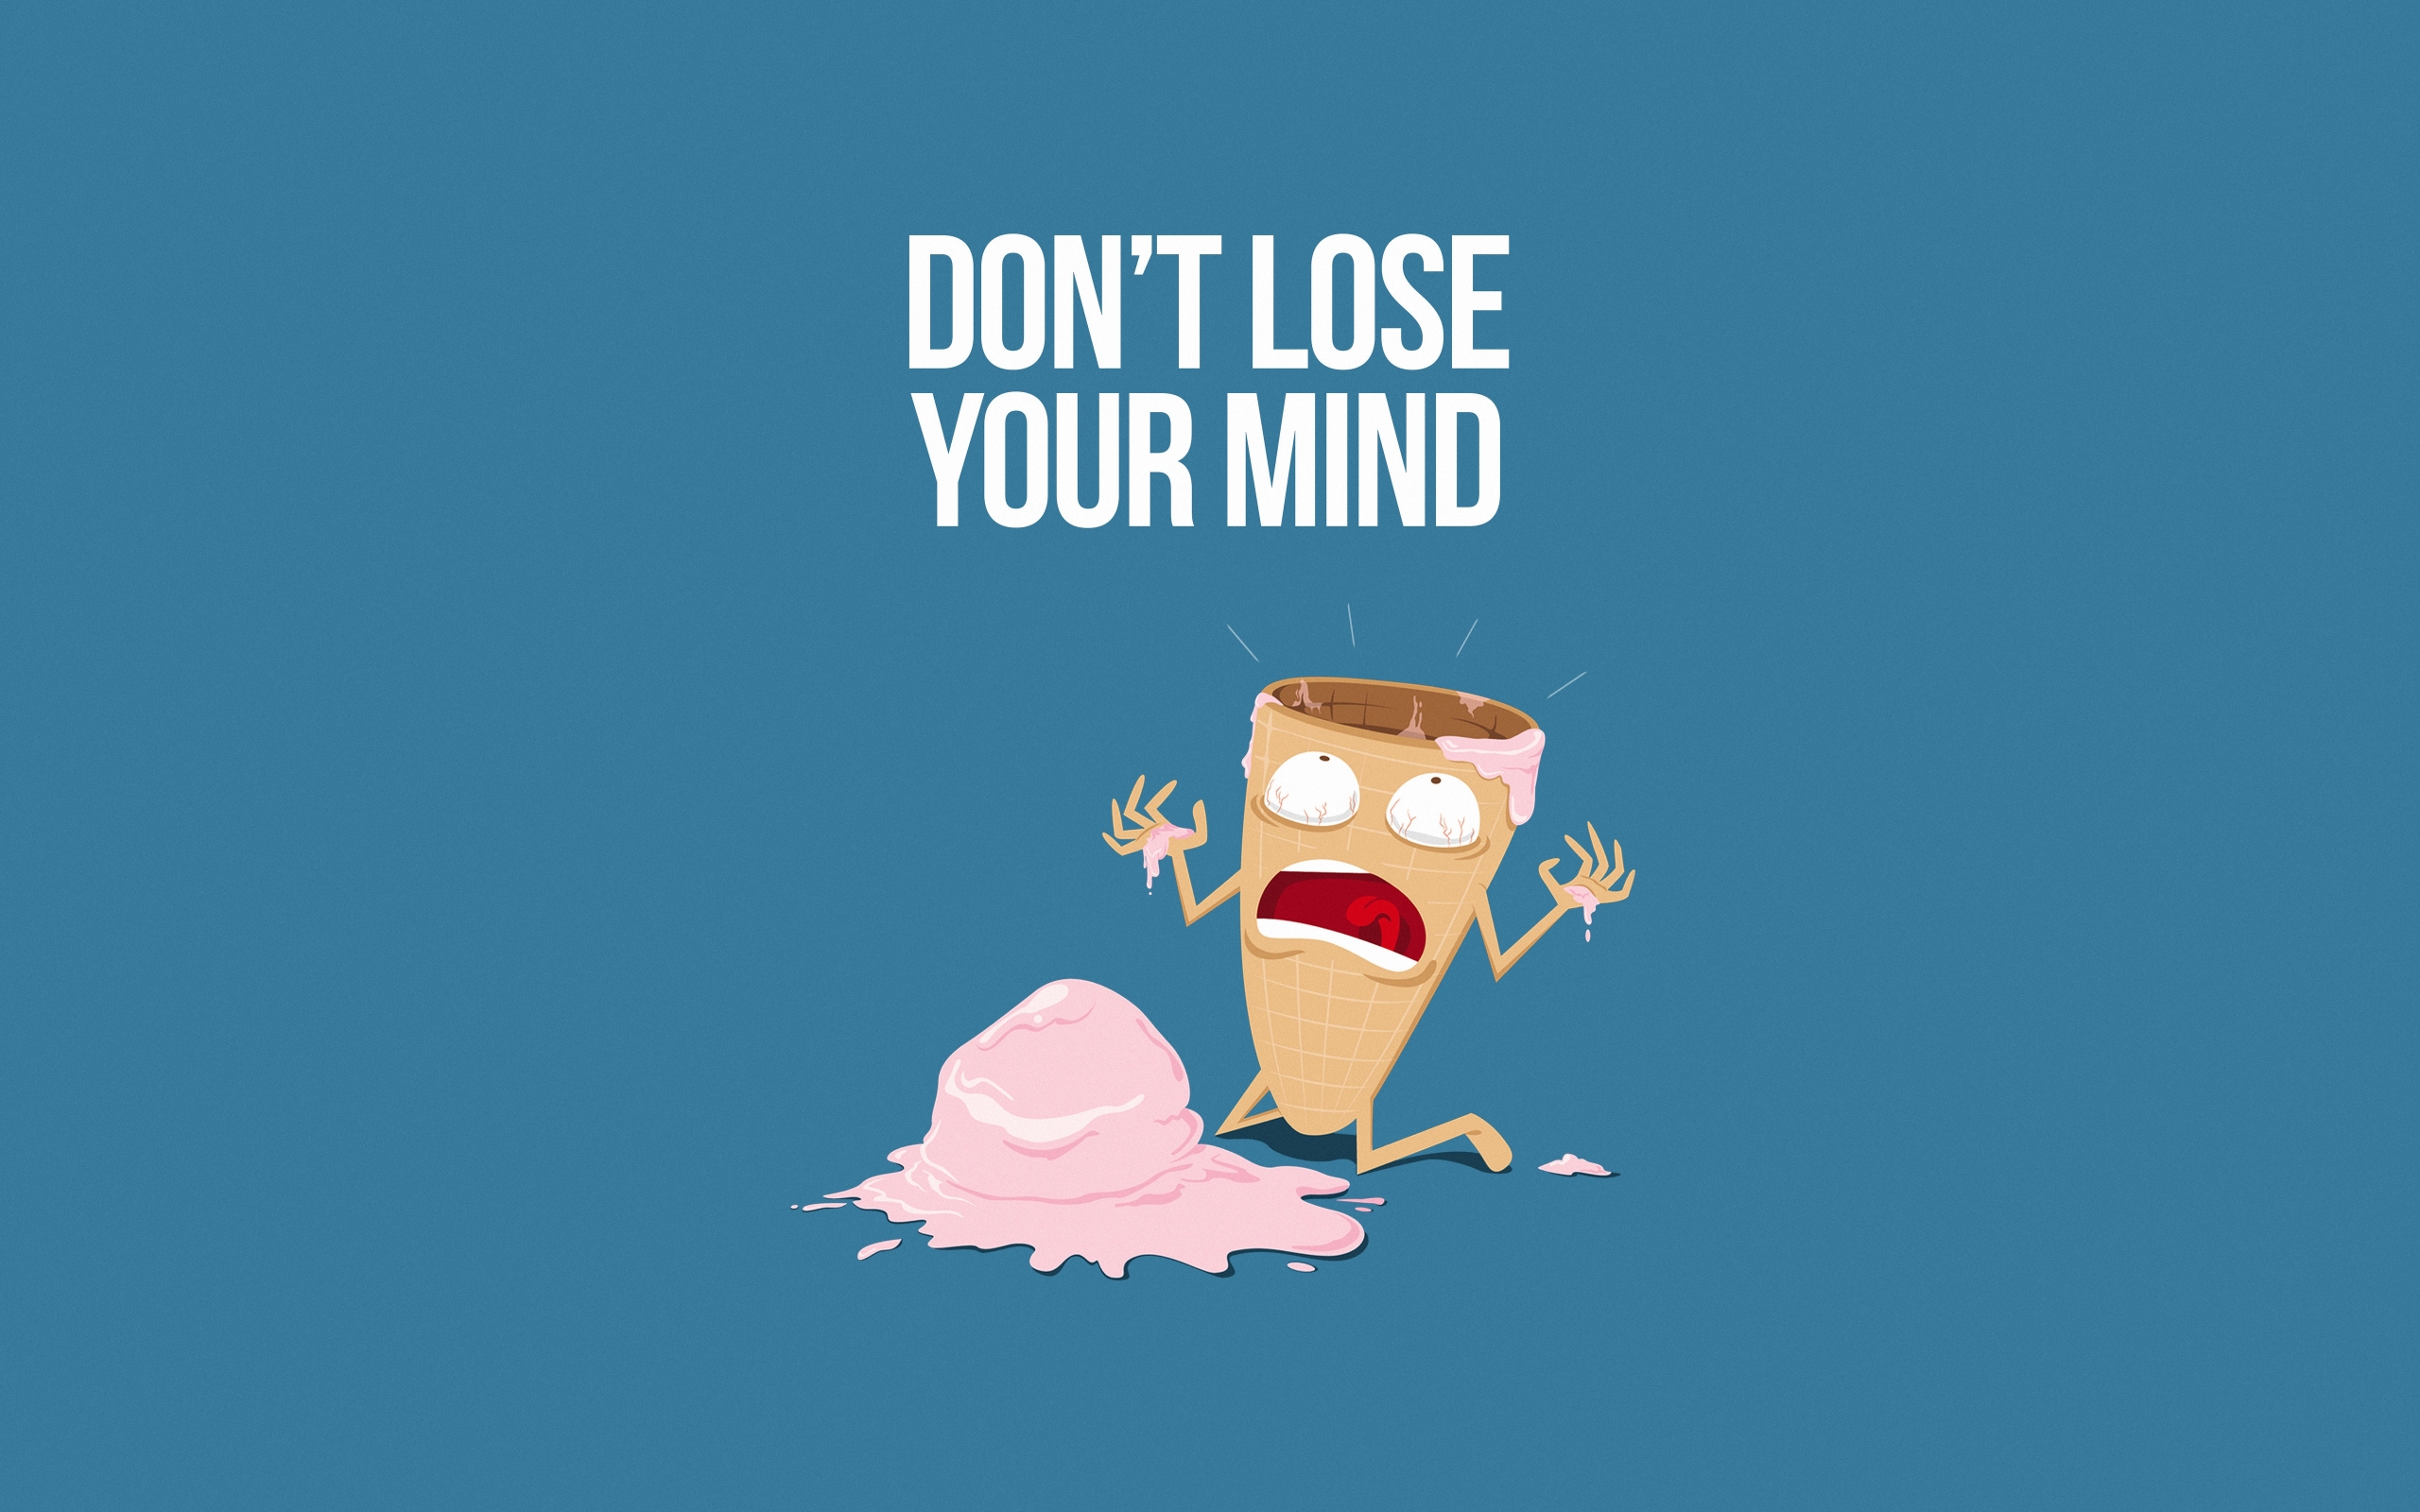 Wallpaper Of Ice Cream, Minimalist, Humor, Art Background - Don T Lose Your Mind - HD Wallpaper 